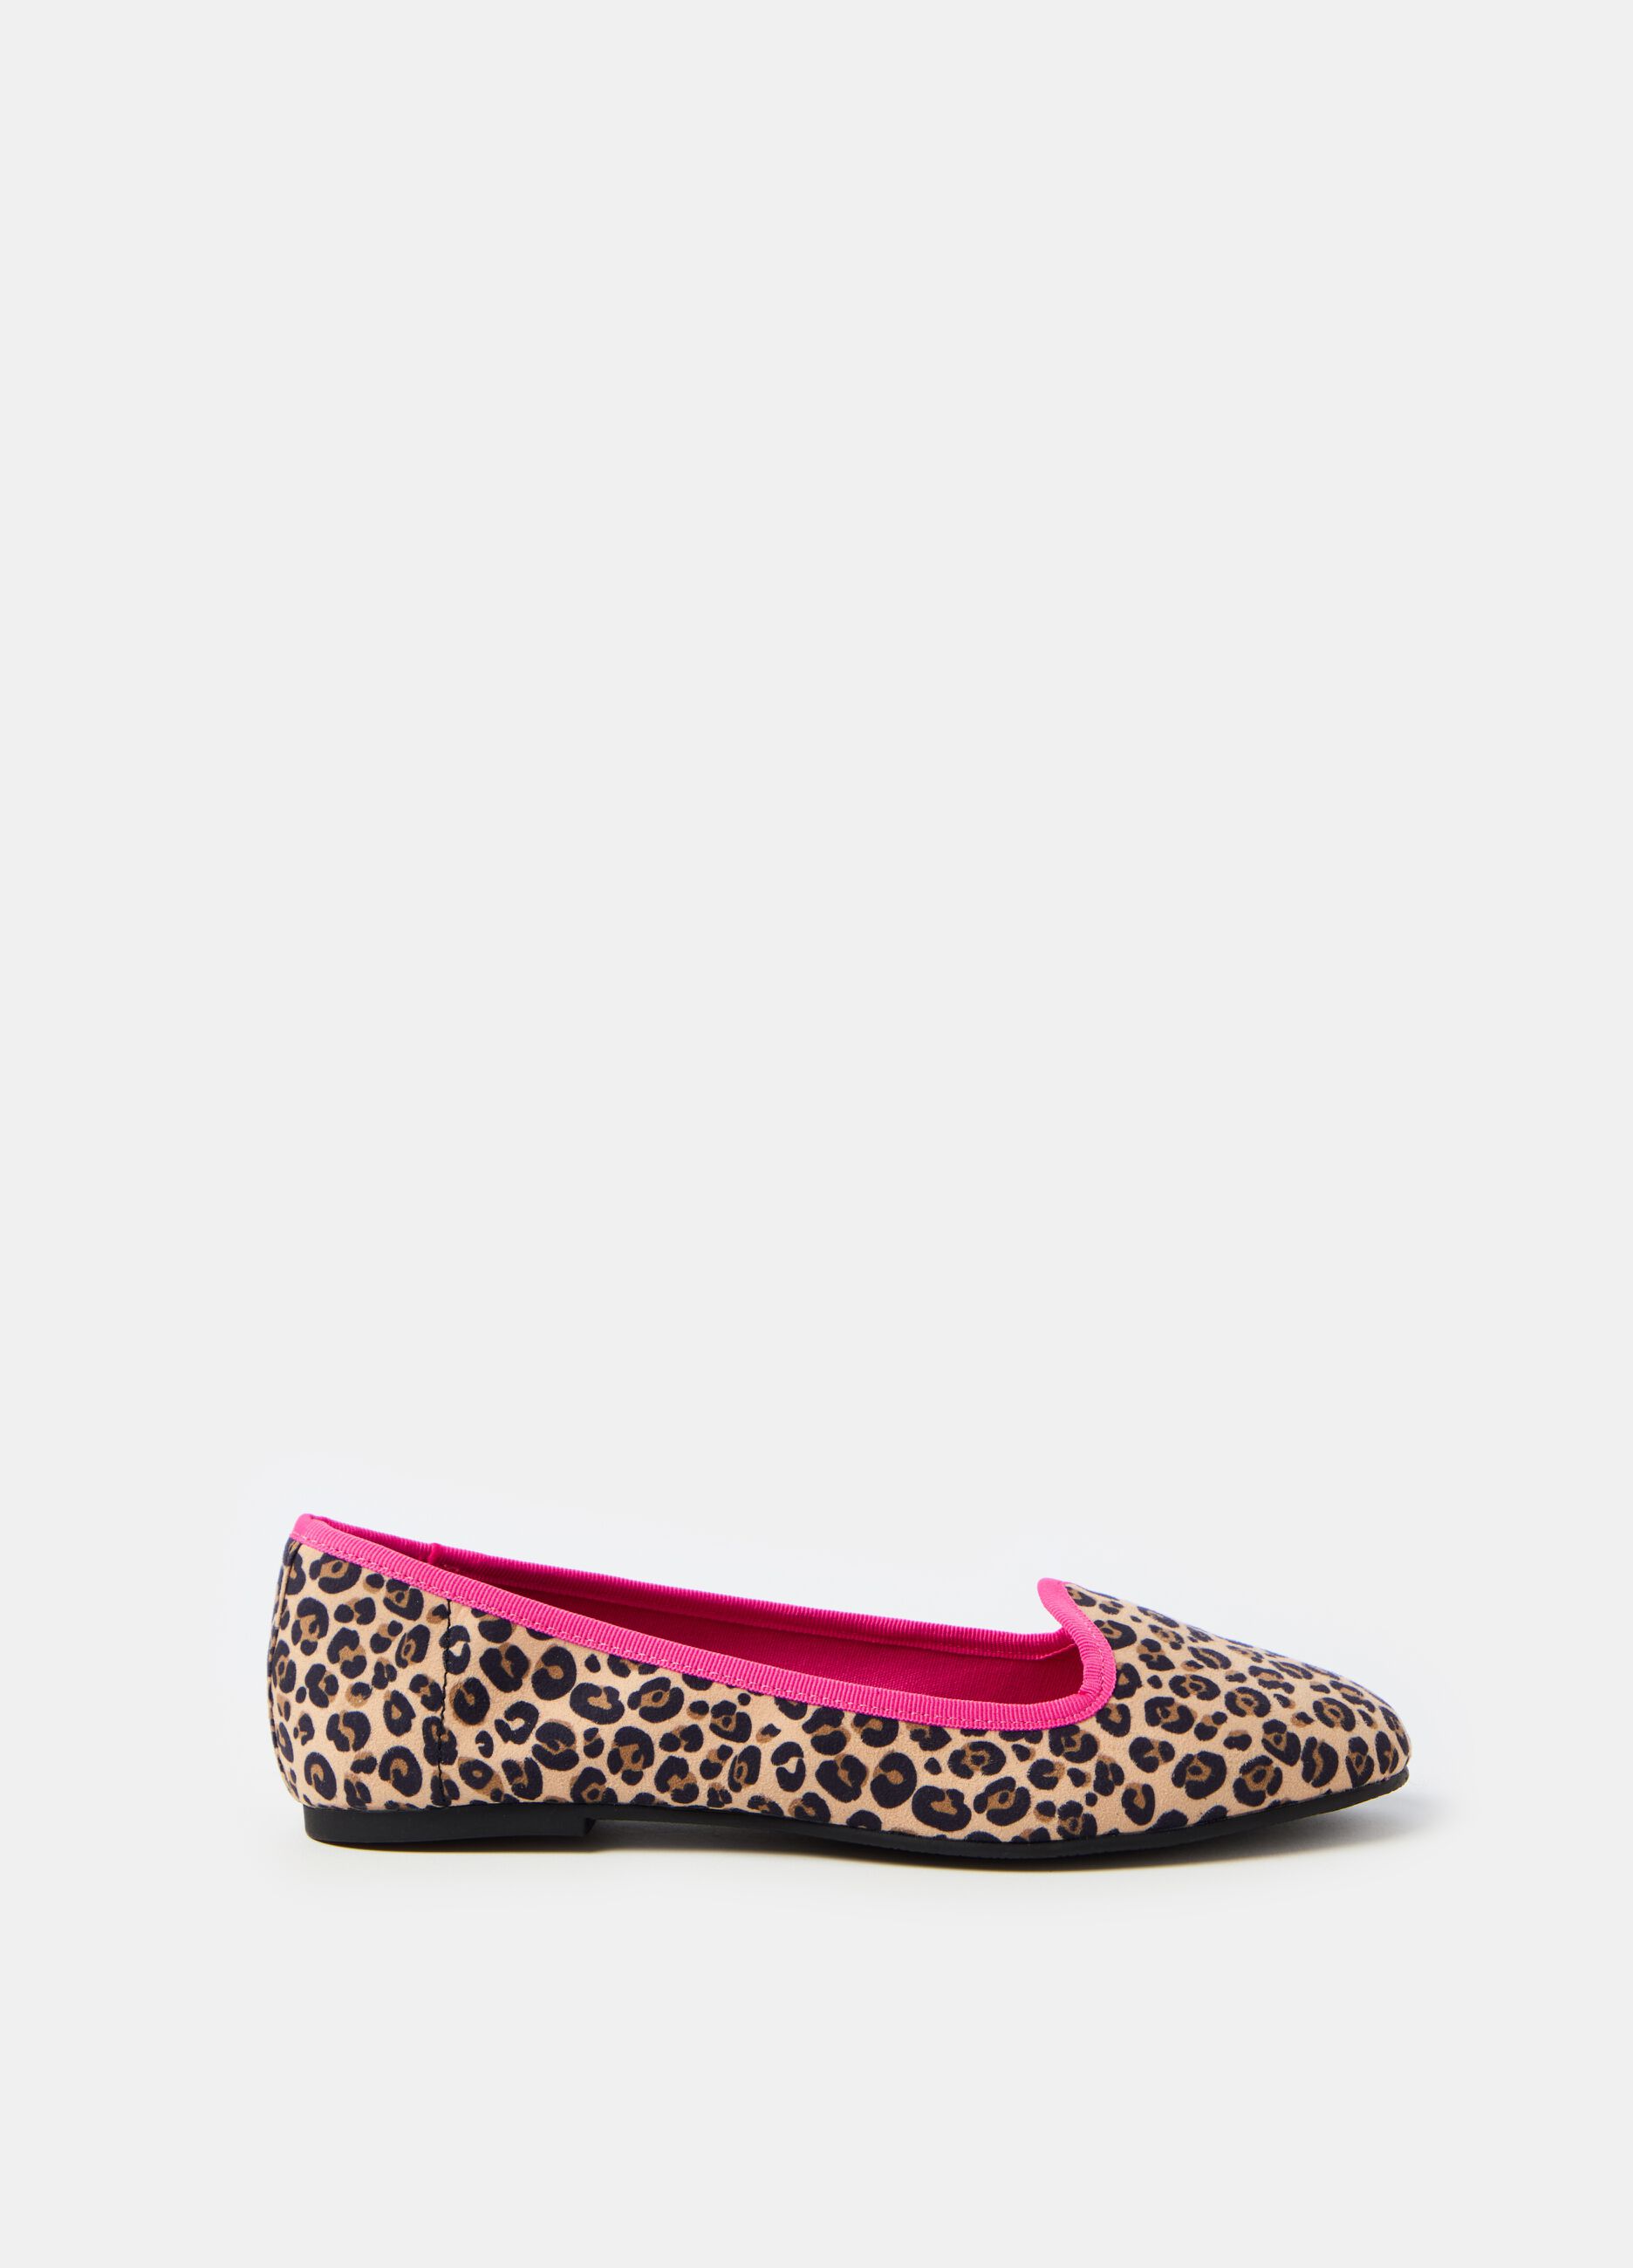 Slipper shoes with animal print